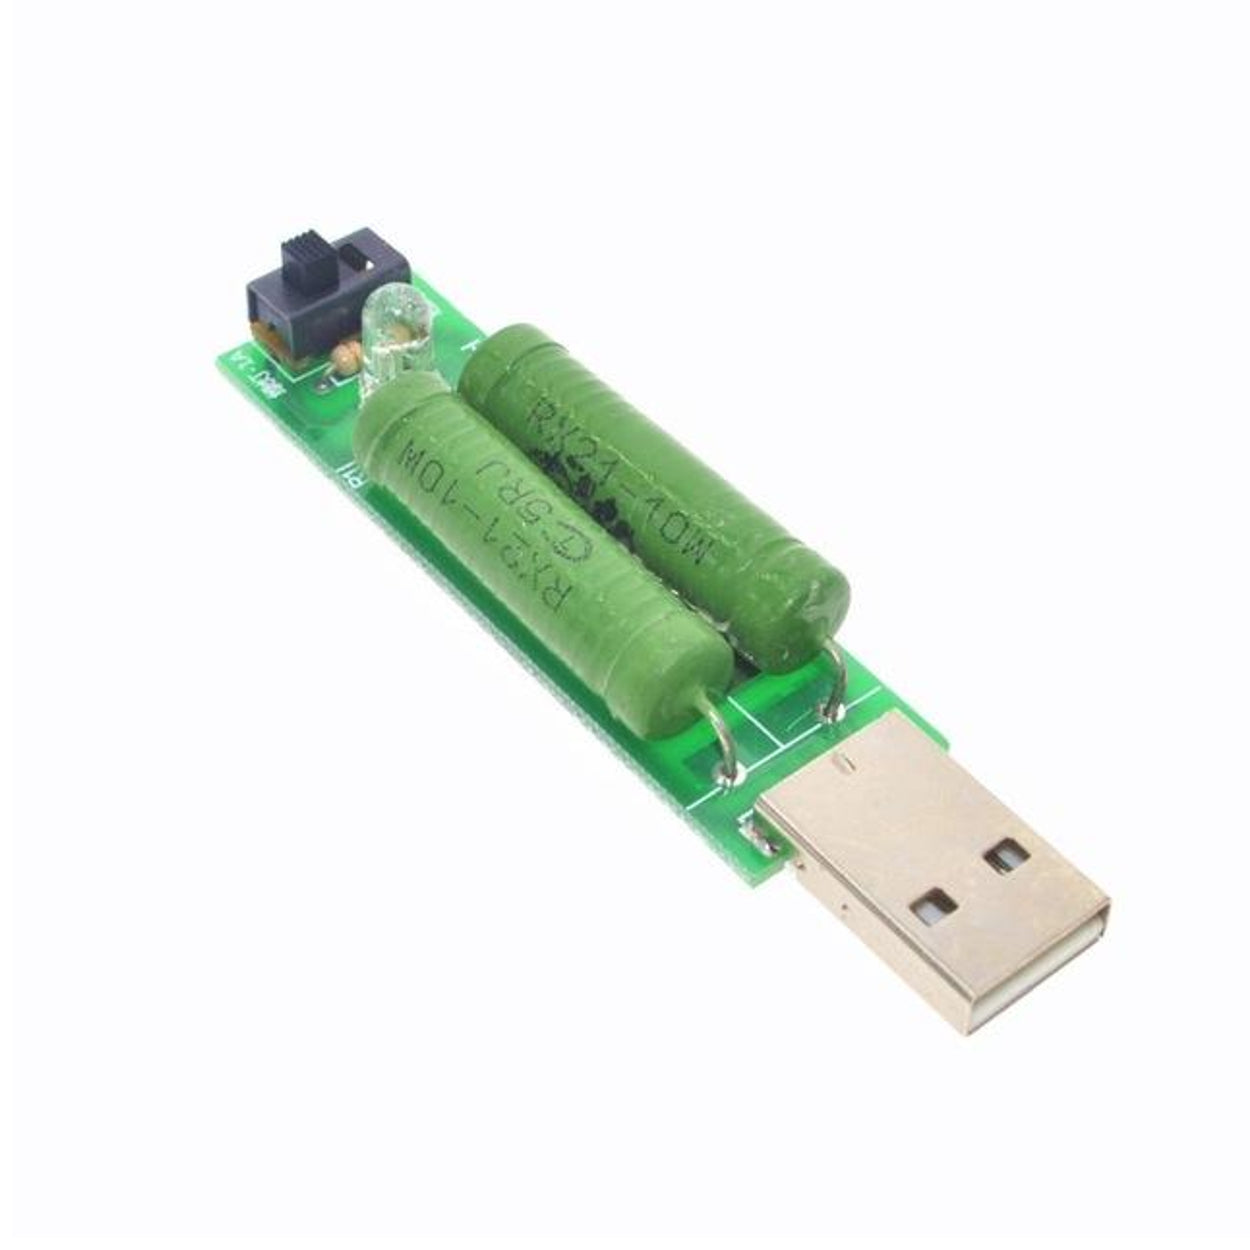 Load Testing Instrument 2A/1A Discharge Aging Resistance USB Power Adapter